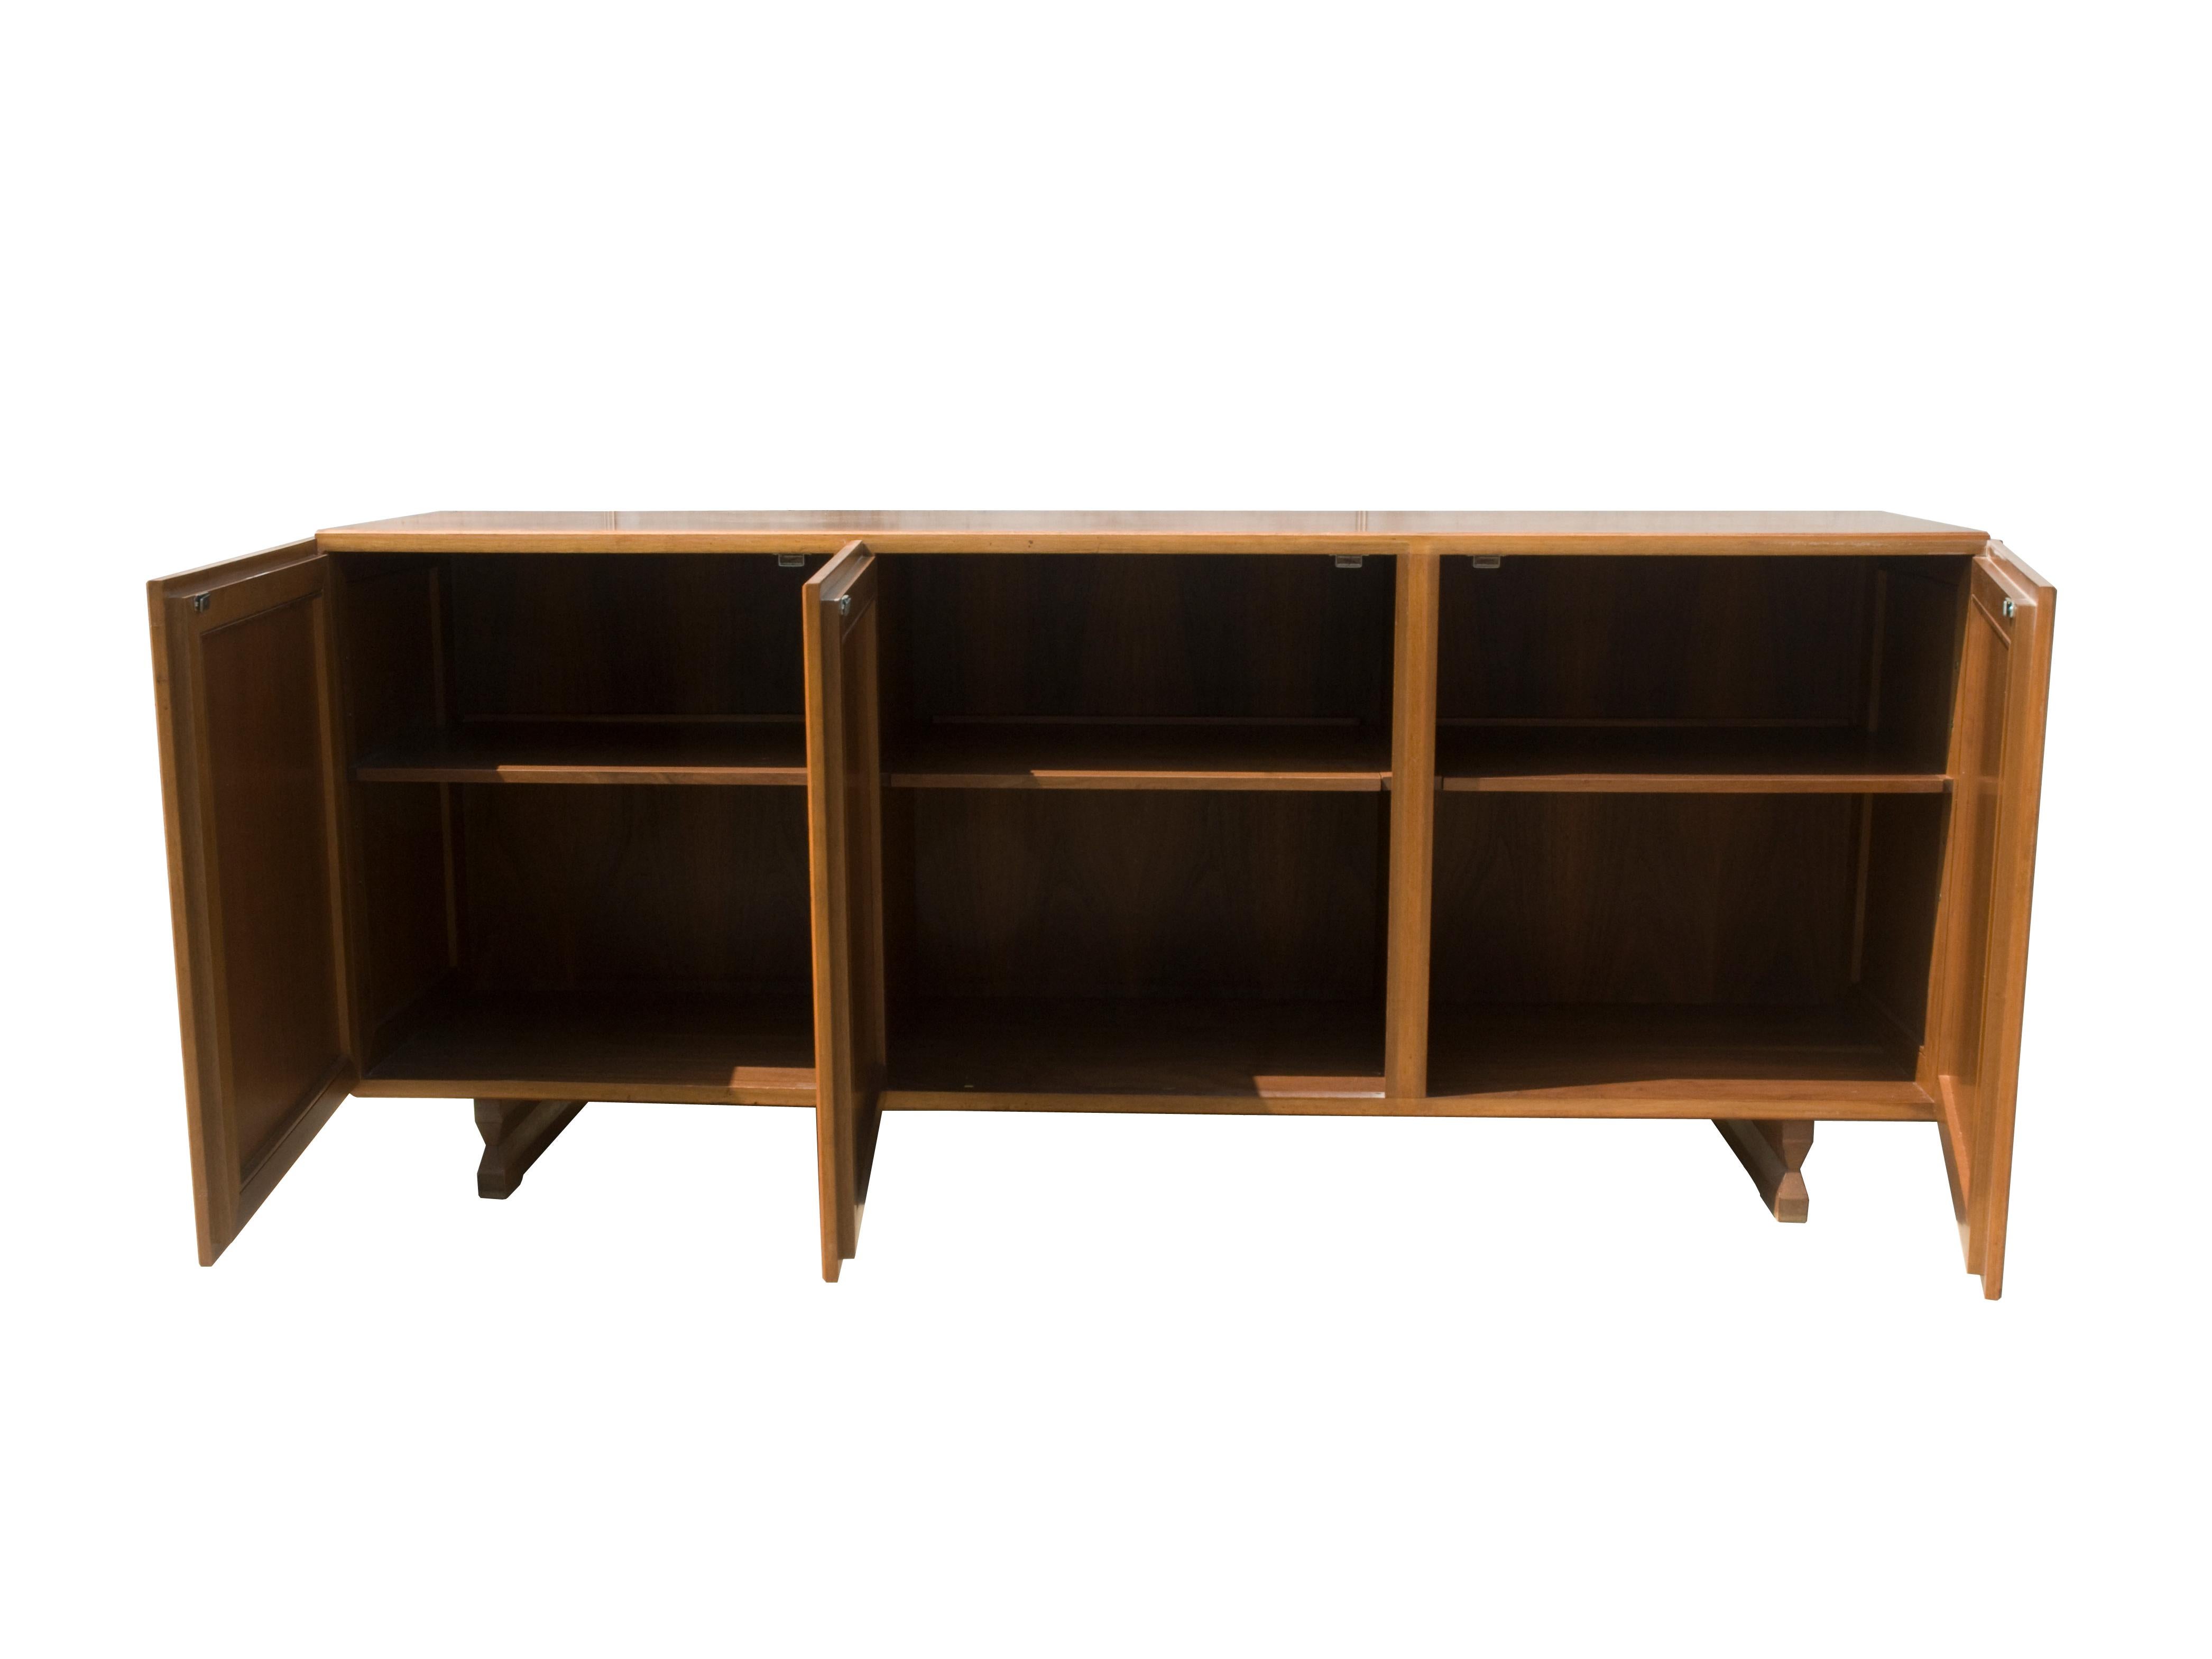 Walnut & olive green fabric 1950s MB 15 Sideboard by Albini & Helg for Poggi For Sale 2